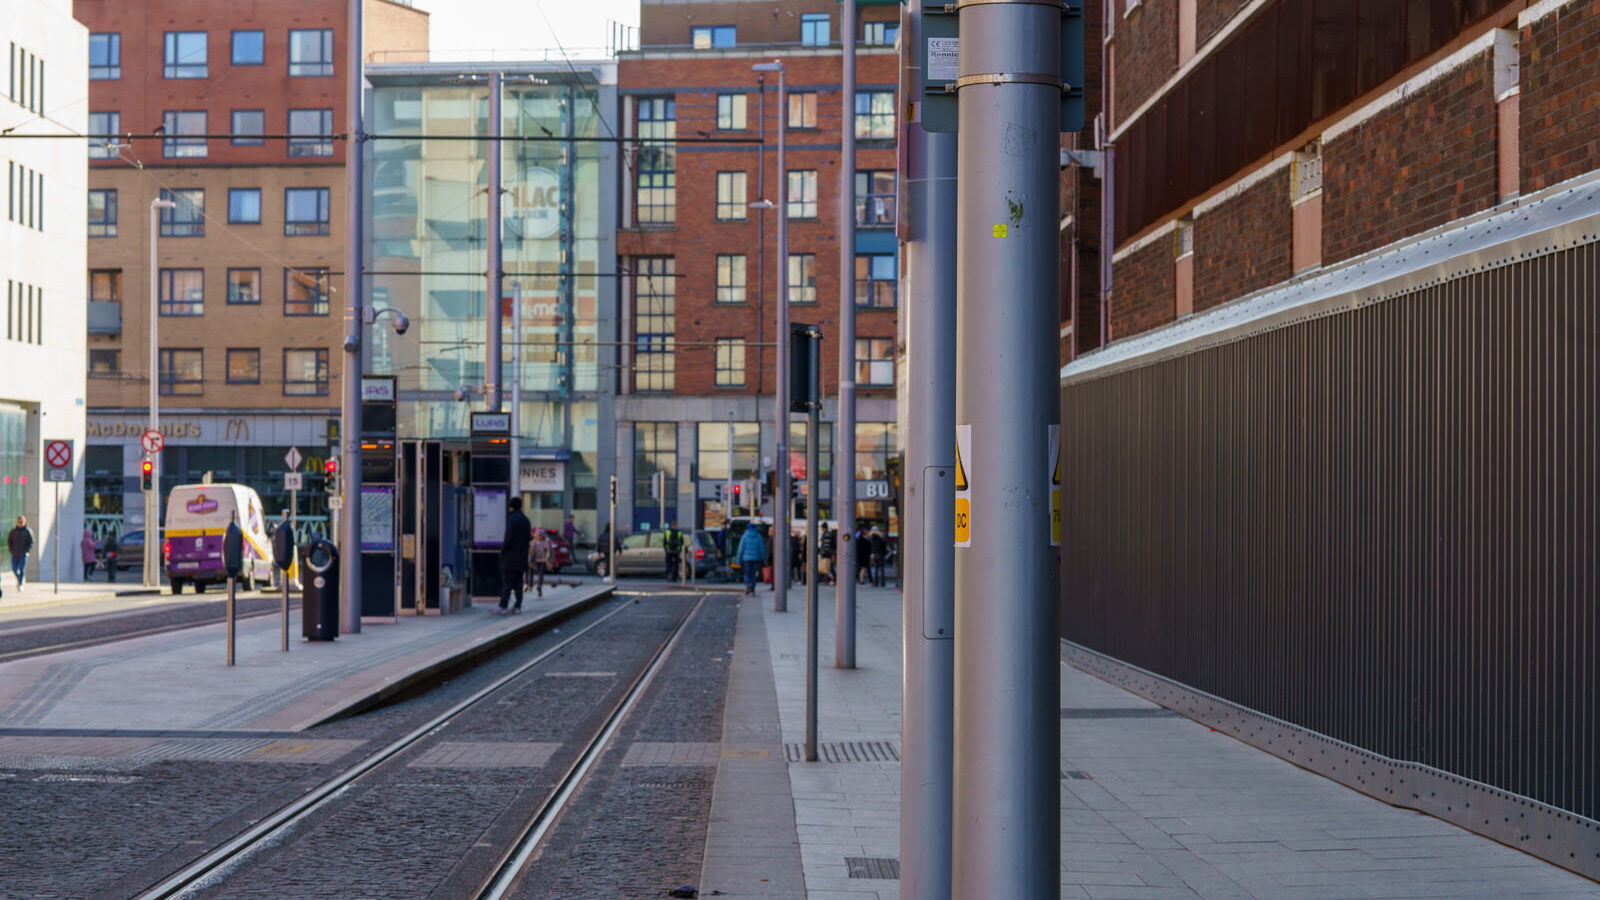 LUAS TRAM STOP AT LOWER DOMINICK STREET [AT THE MOMENT THE AREA DOES FEEL SAFER]-228690-1